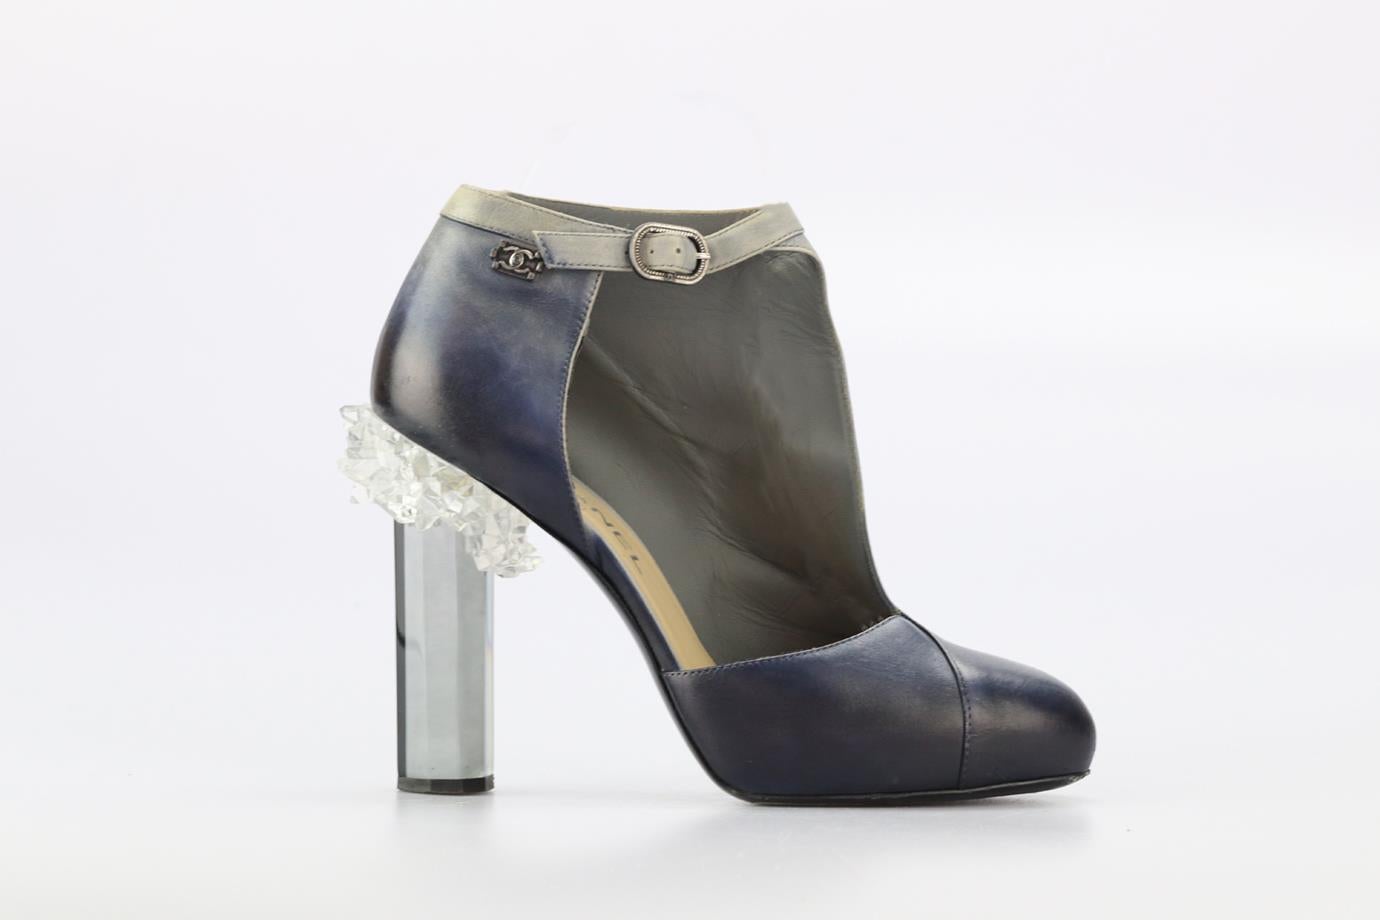 Chanel 2012 Leather Ankle Boots. Blue and navy. Buckle fastening - Side. Does not come with - dustbag or box. EU 38.5 (UK 5.5, US 8.5). Insole: 9.6 in. Heel height: 3.3 in. Condition: Used. Good condition - Wear to soles. Some scuff marks to upper